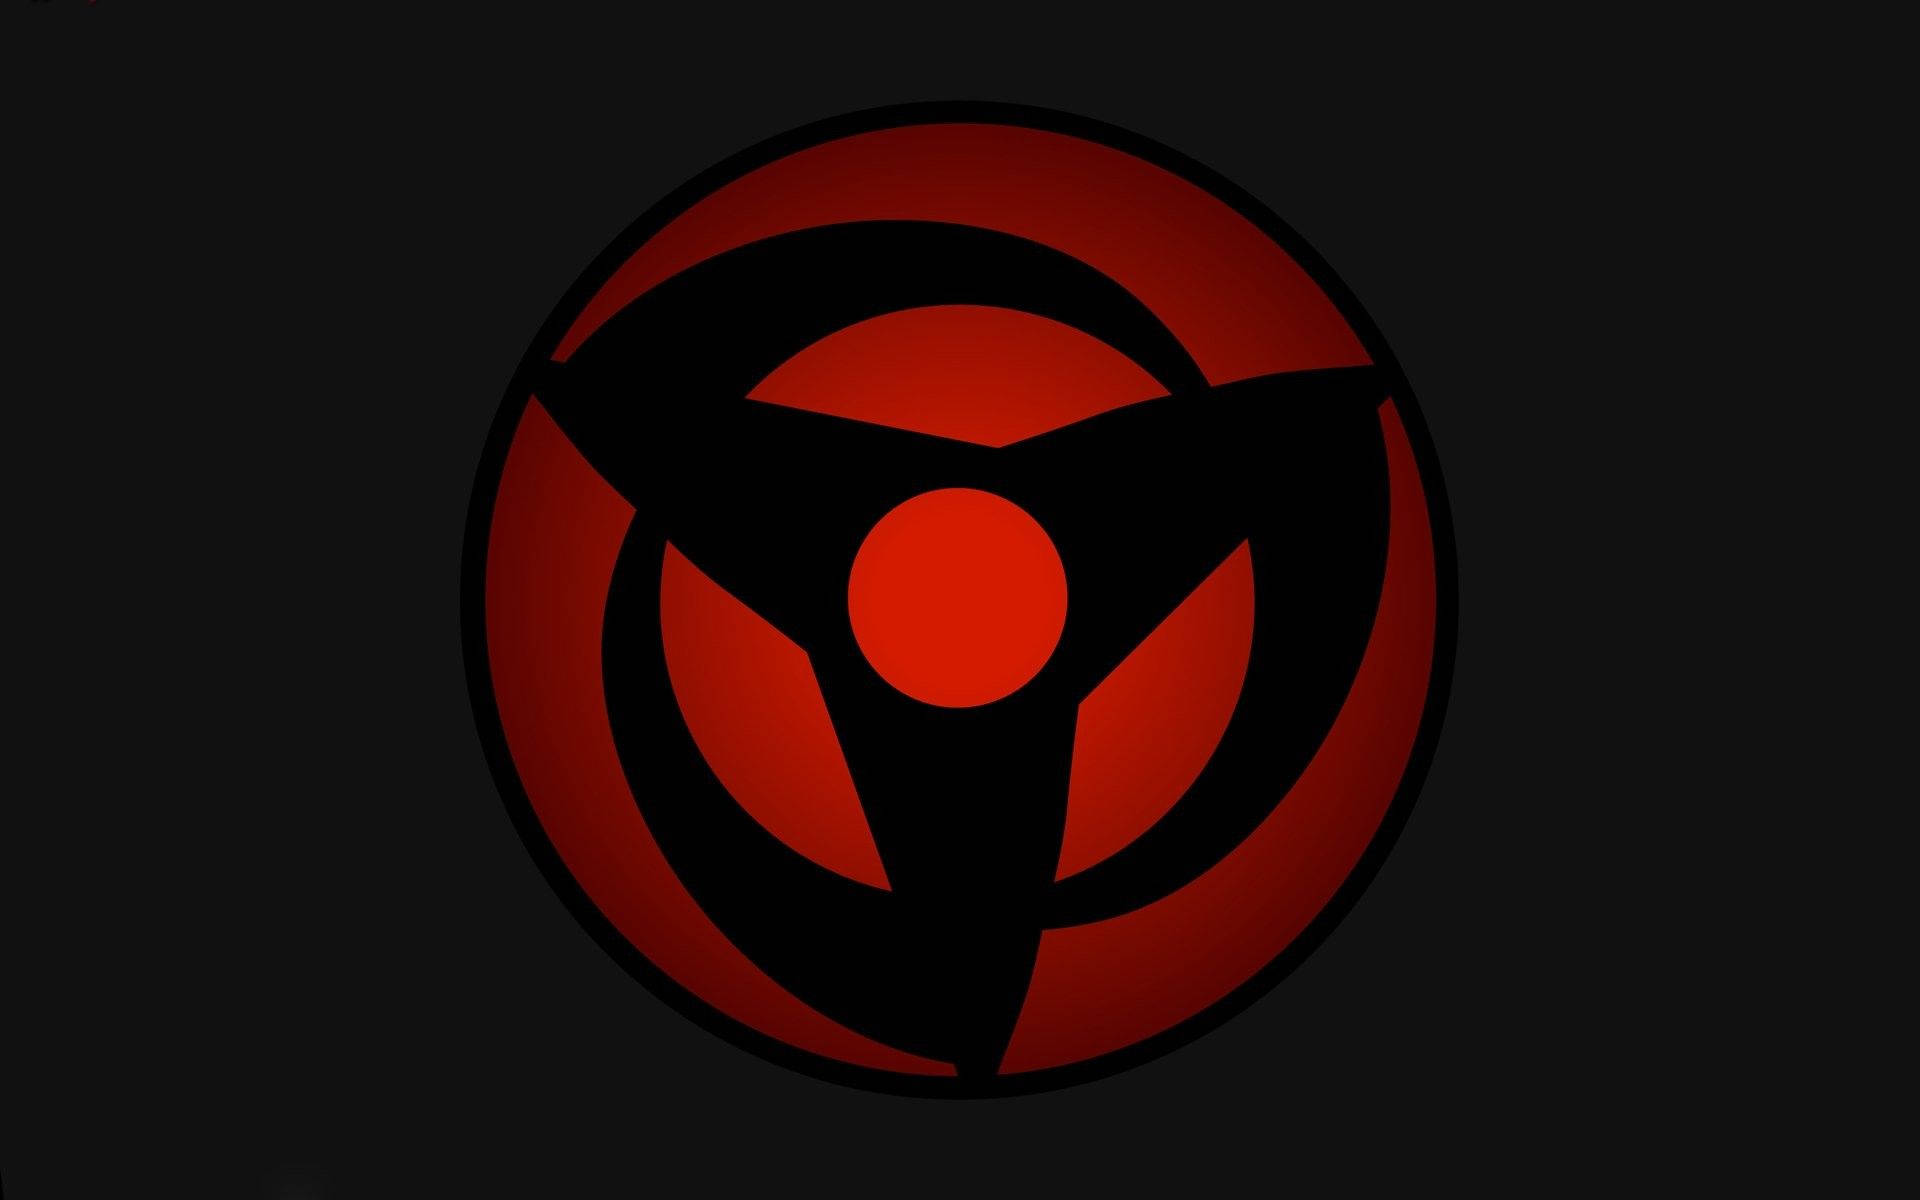 Naruto Symbol With Red Circle Background